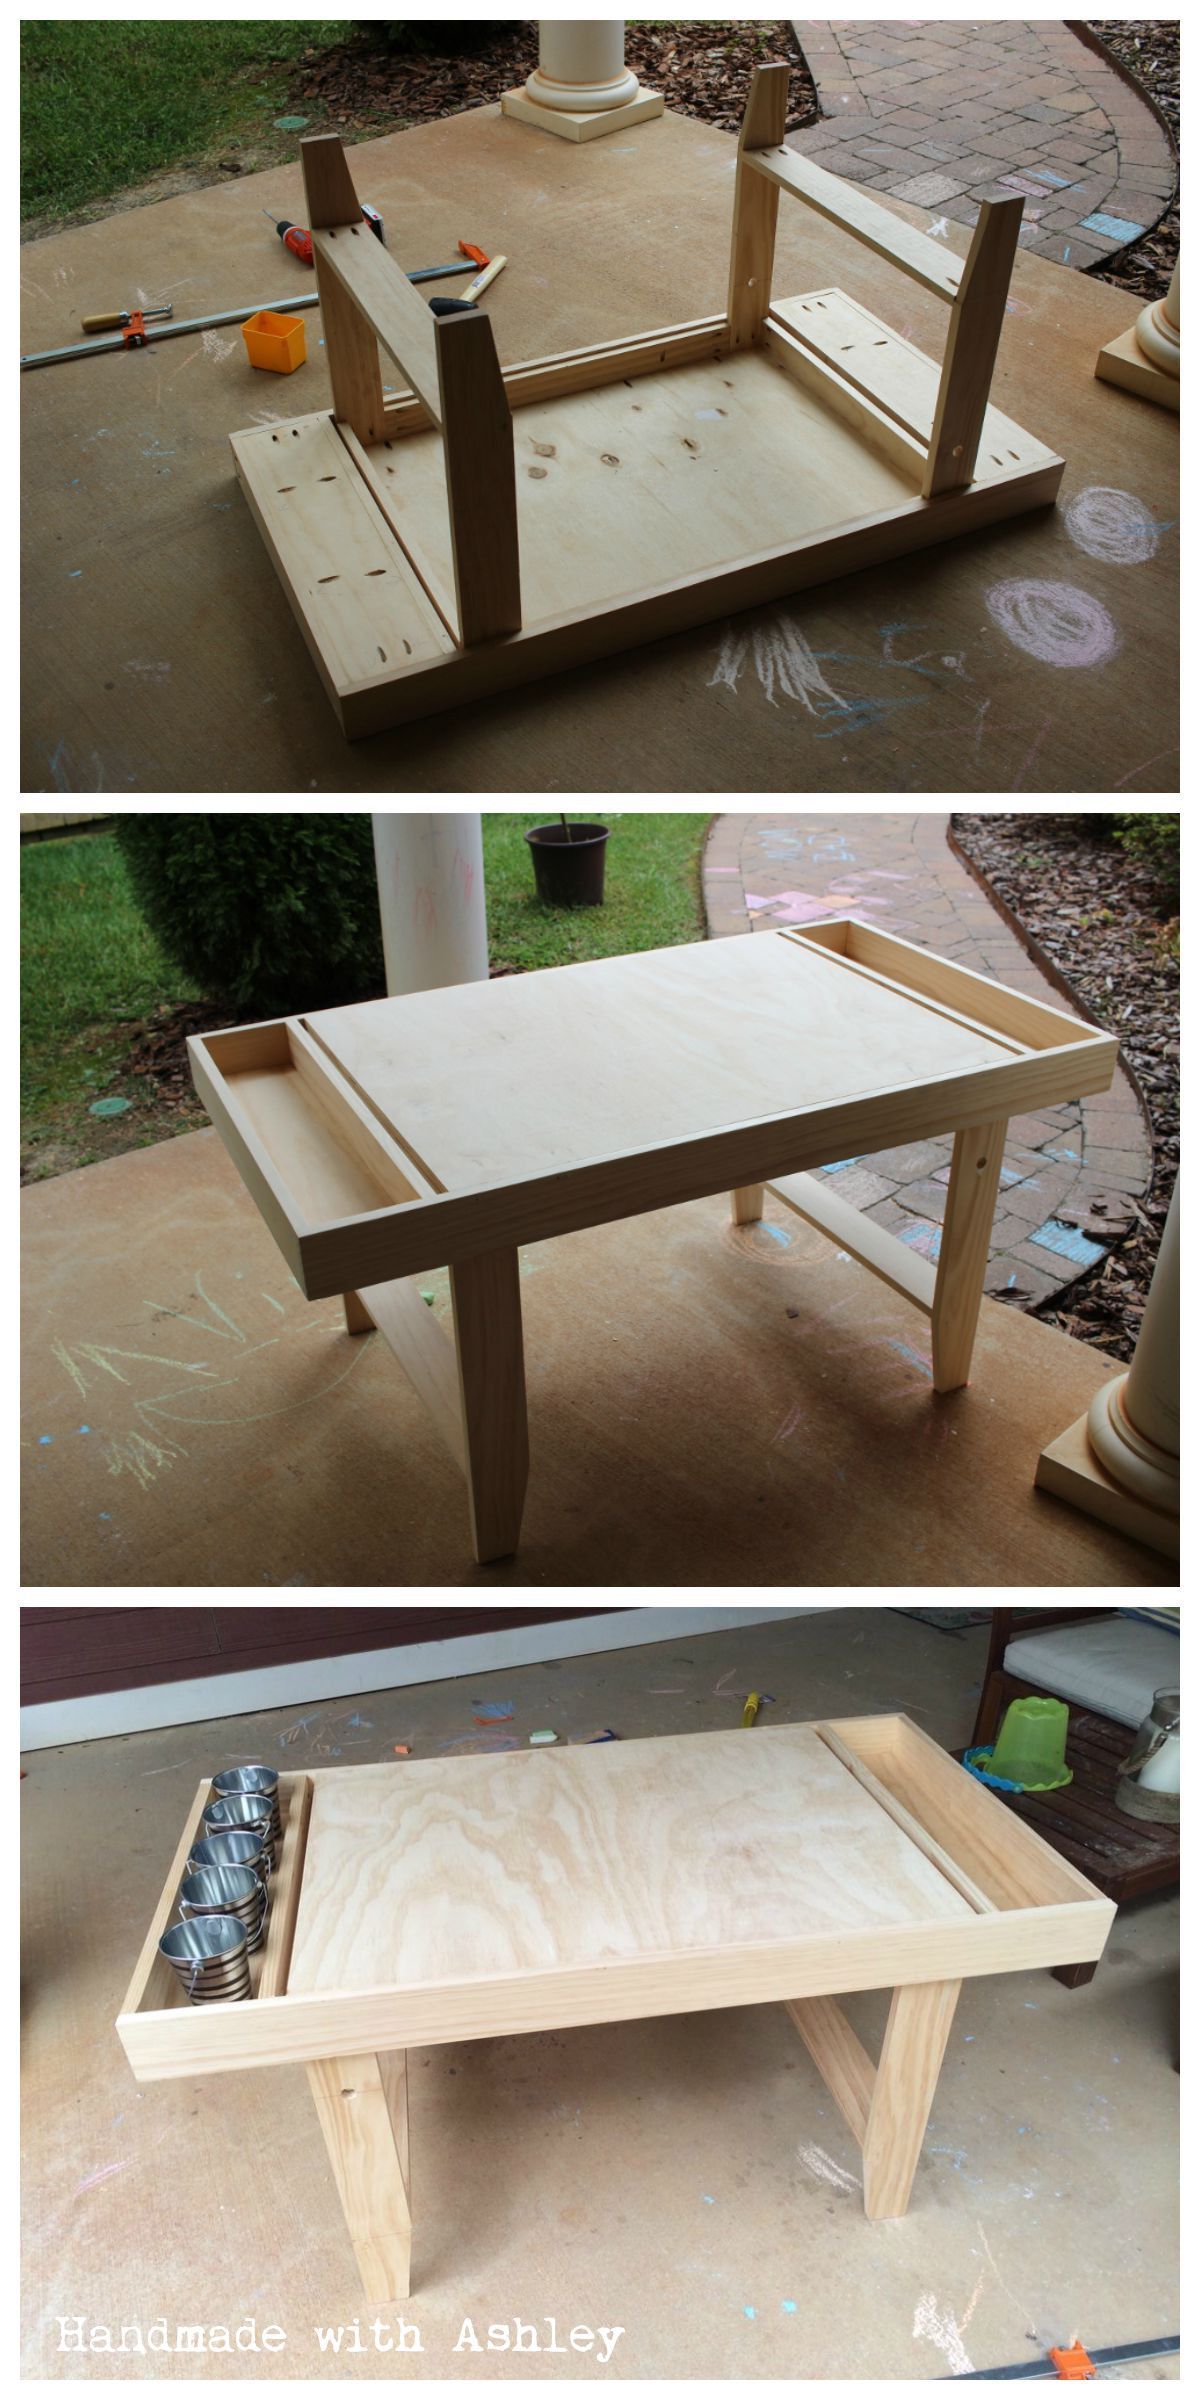 Modern Play Table with Storage - Modern Play Table with Storage -   15 diy Art table ideas